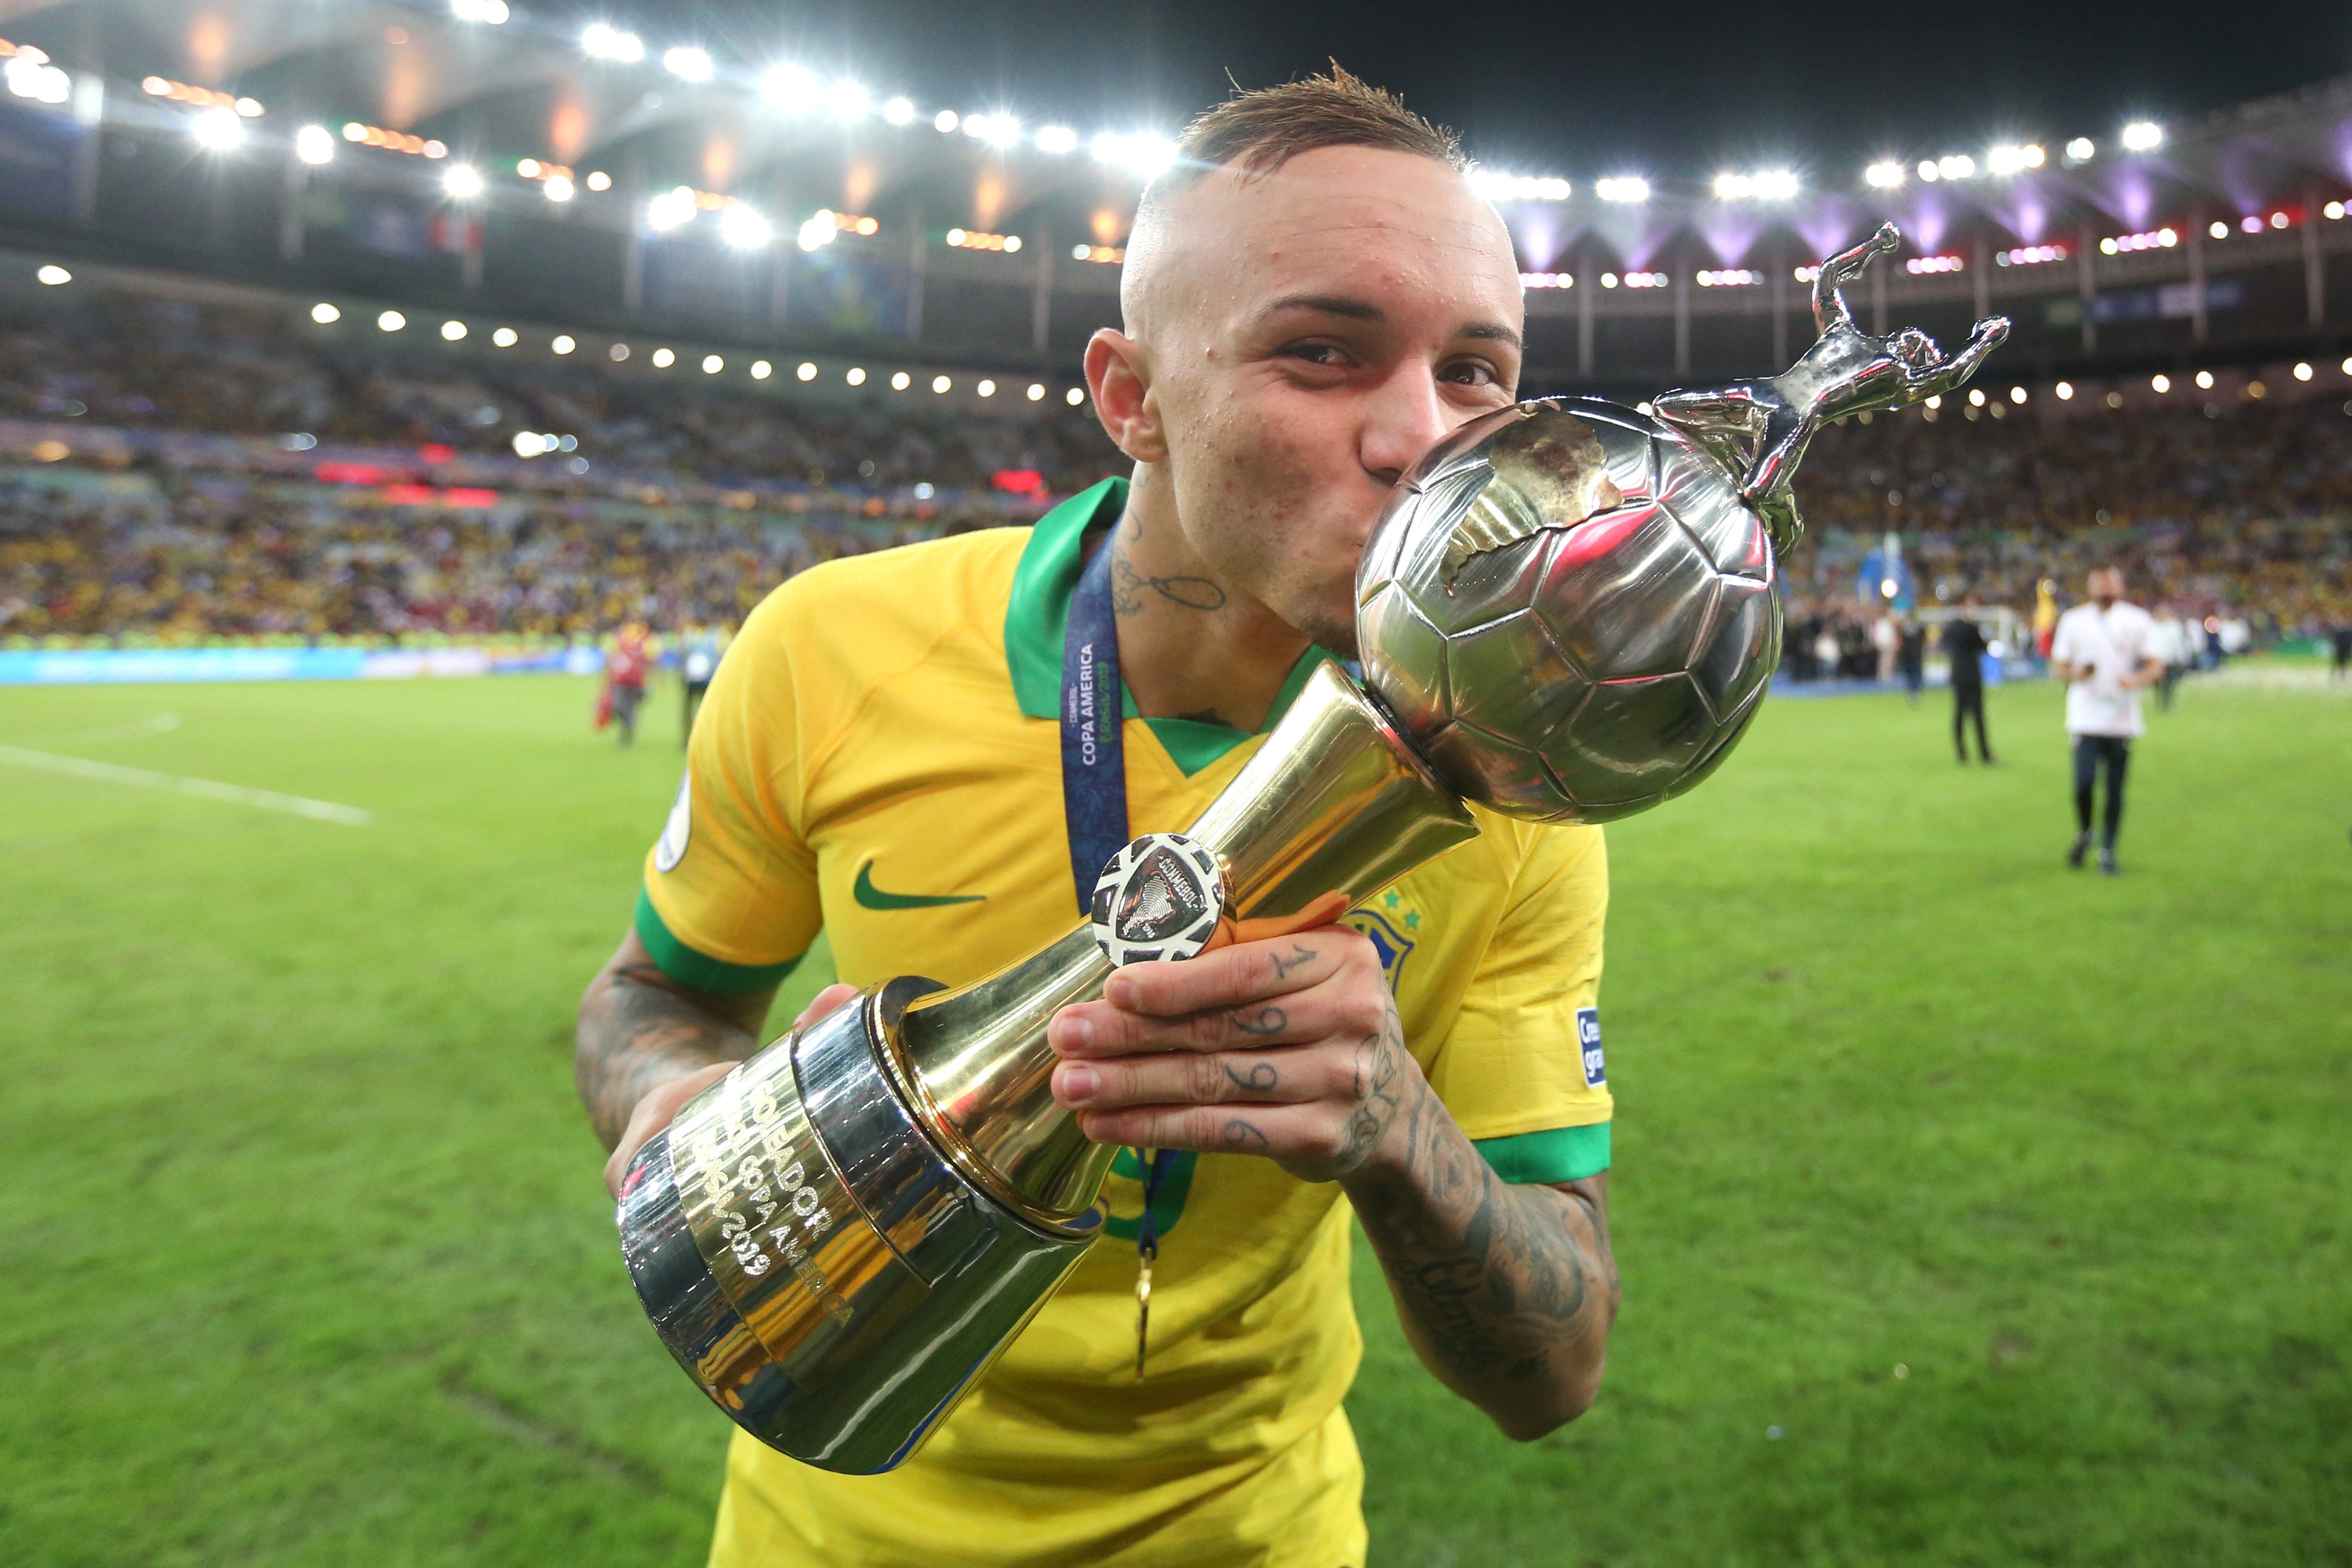 RIO DE JANEIRO, BRAZIL - JULY 07: Everton of Brazil poses with the trophy of top scorer after winning the Copa America Brazil 2019 Final match between Brazil and Peru at Maracana Stadium on July 07, 2019 in Rio de Janeiro, Brazil. (Photo by Alexandre Schneider/Getty Images)